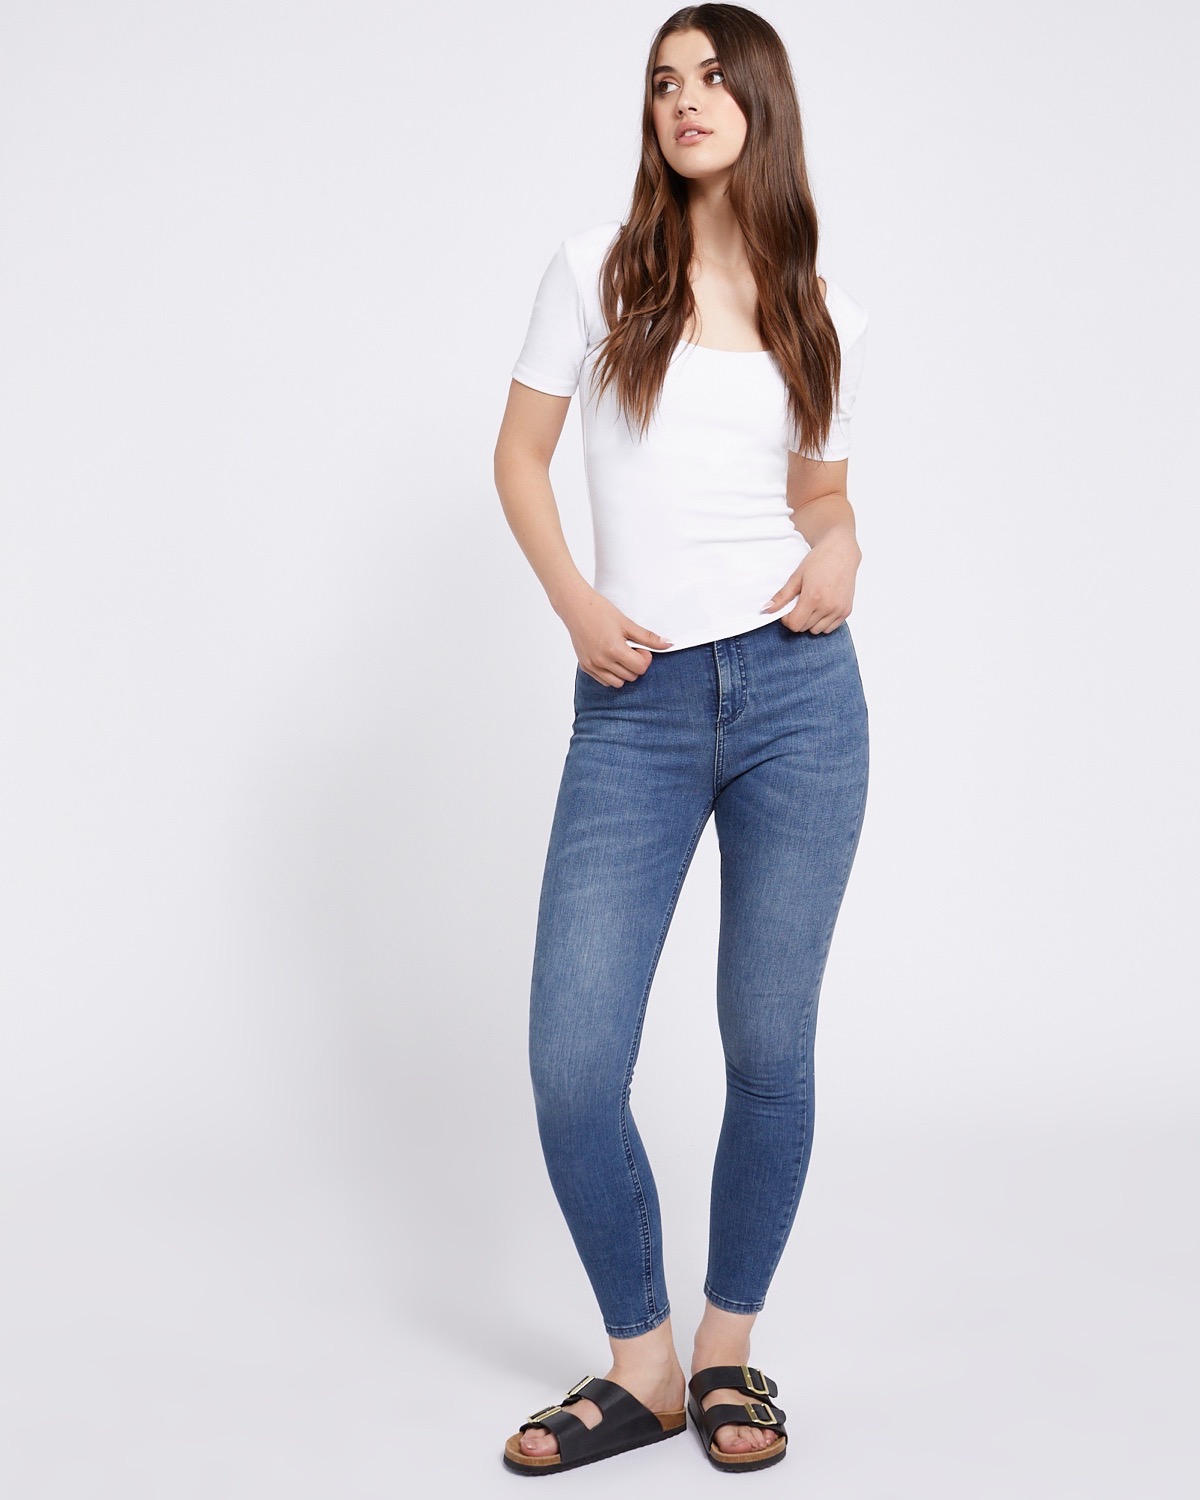 New LADIES WOMEN HIGH WAISTED SEXY SKINNY JEANS PANTS SIZE 6 8 10 12 14 16  18 UK